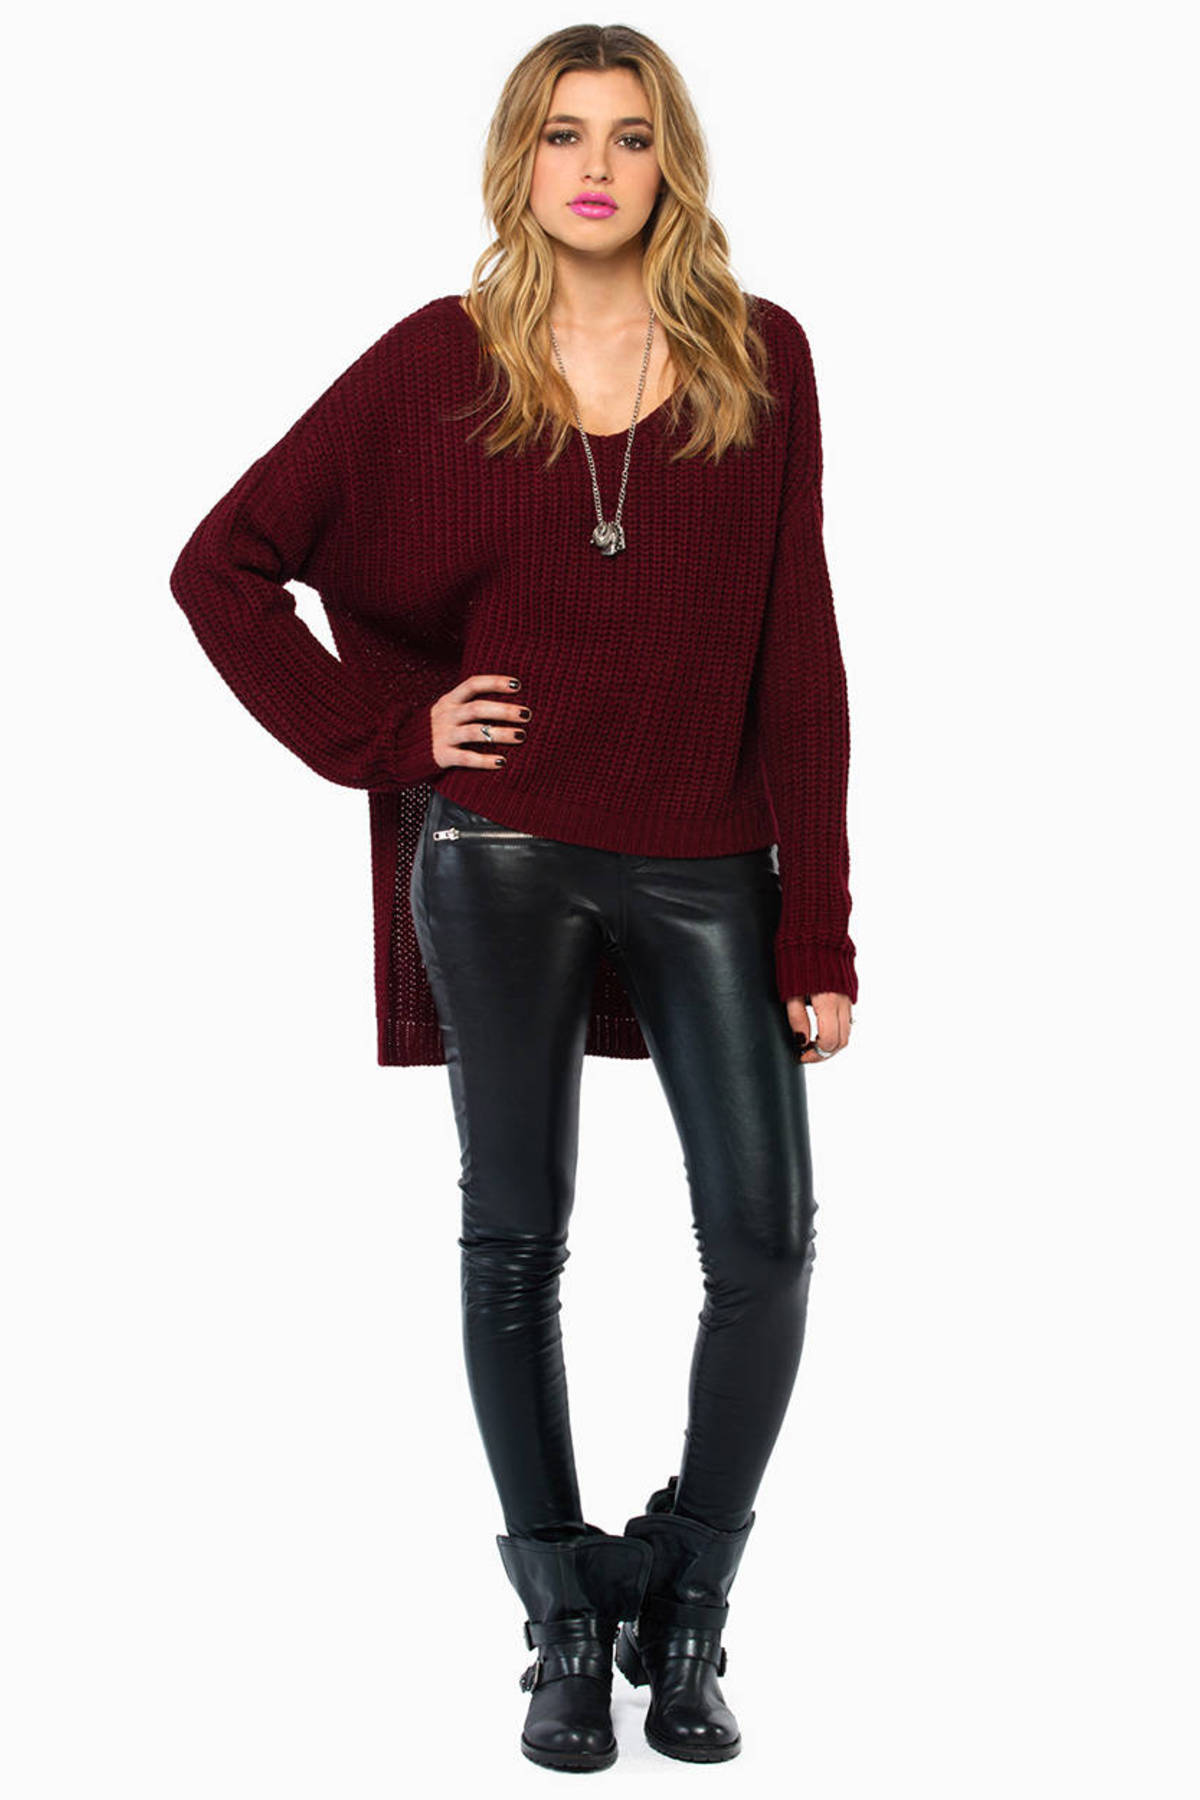 Burgundy Sweater - red Sweater - High Low Sweater - Burgundy Top